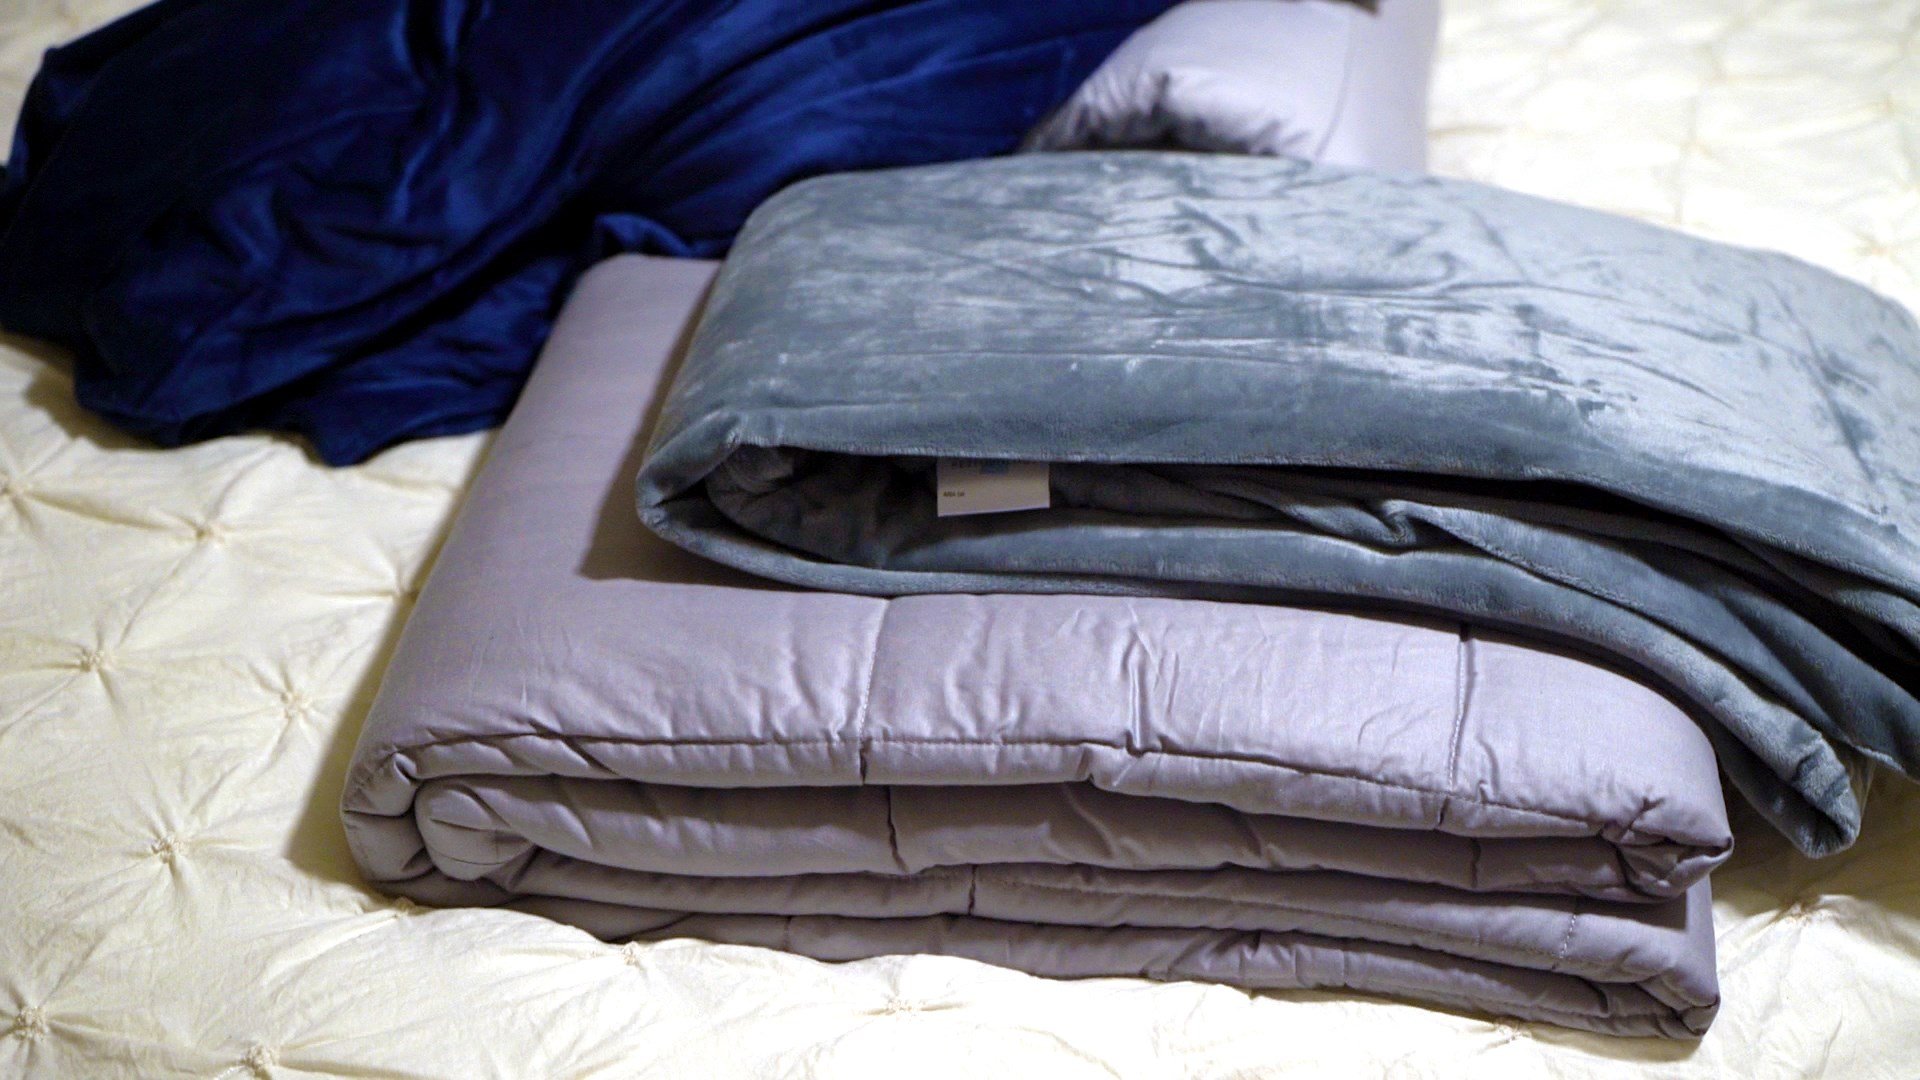 This weighted blanket can help you sleep better and save you $12 - CBS